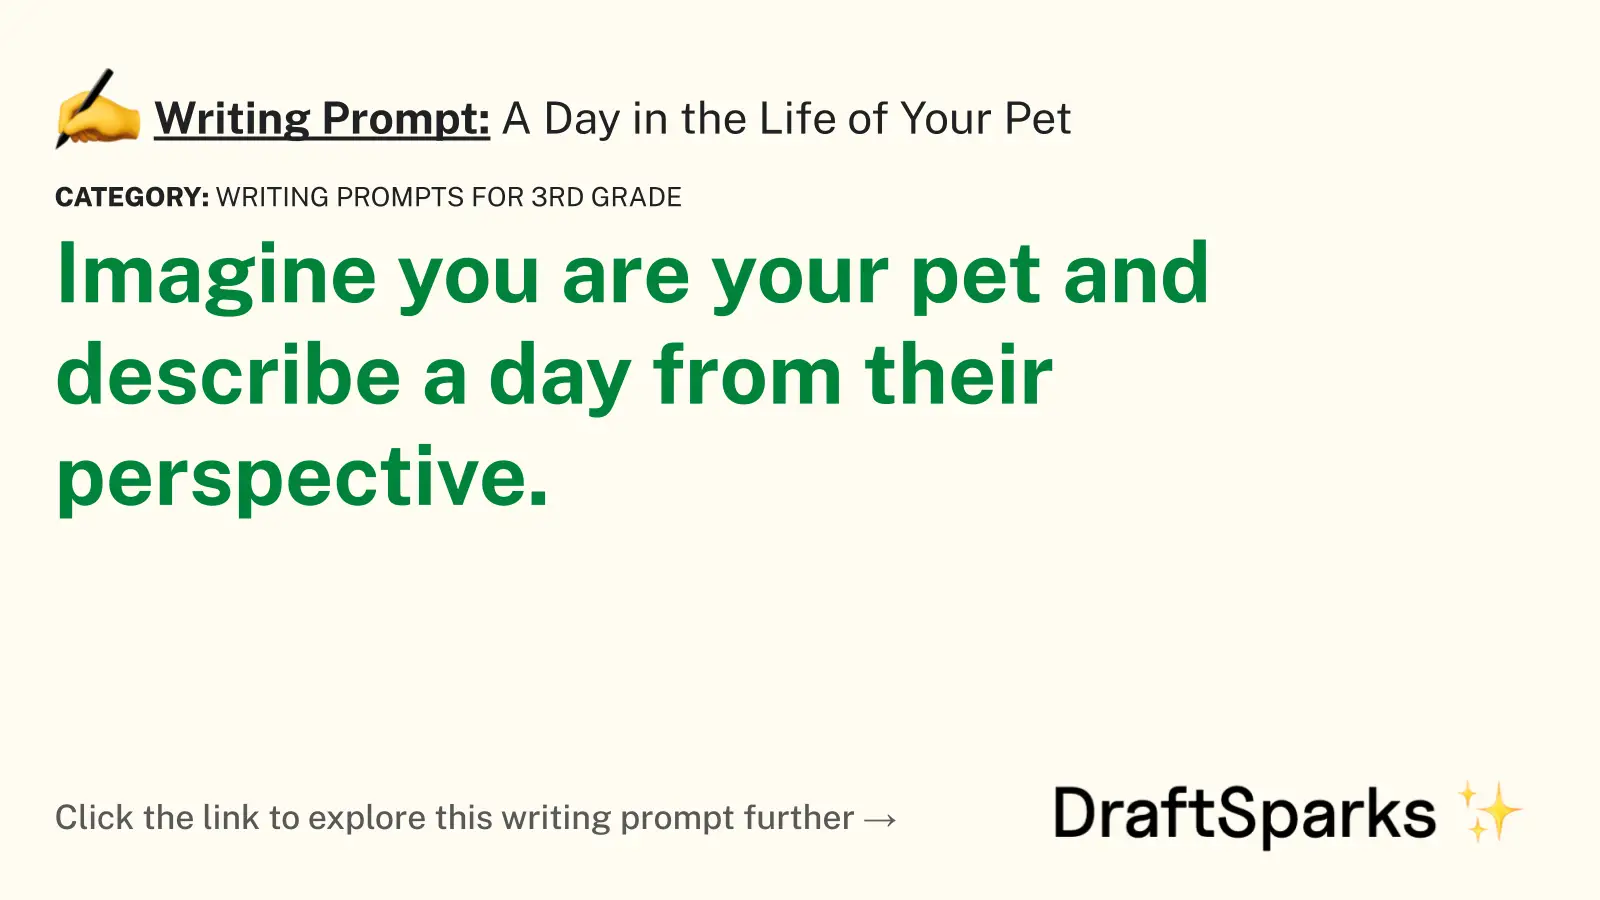 A Day in the Life of Your Pet